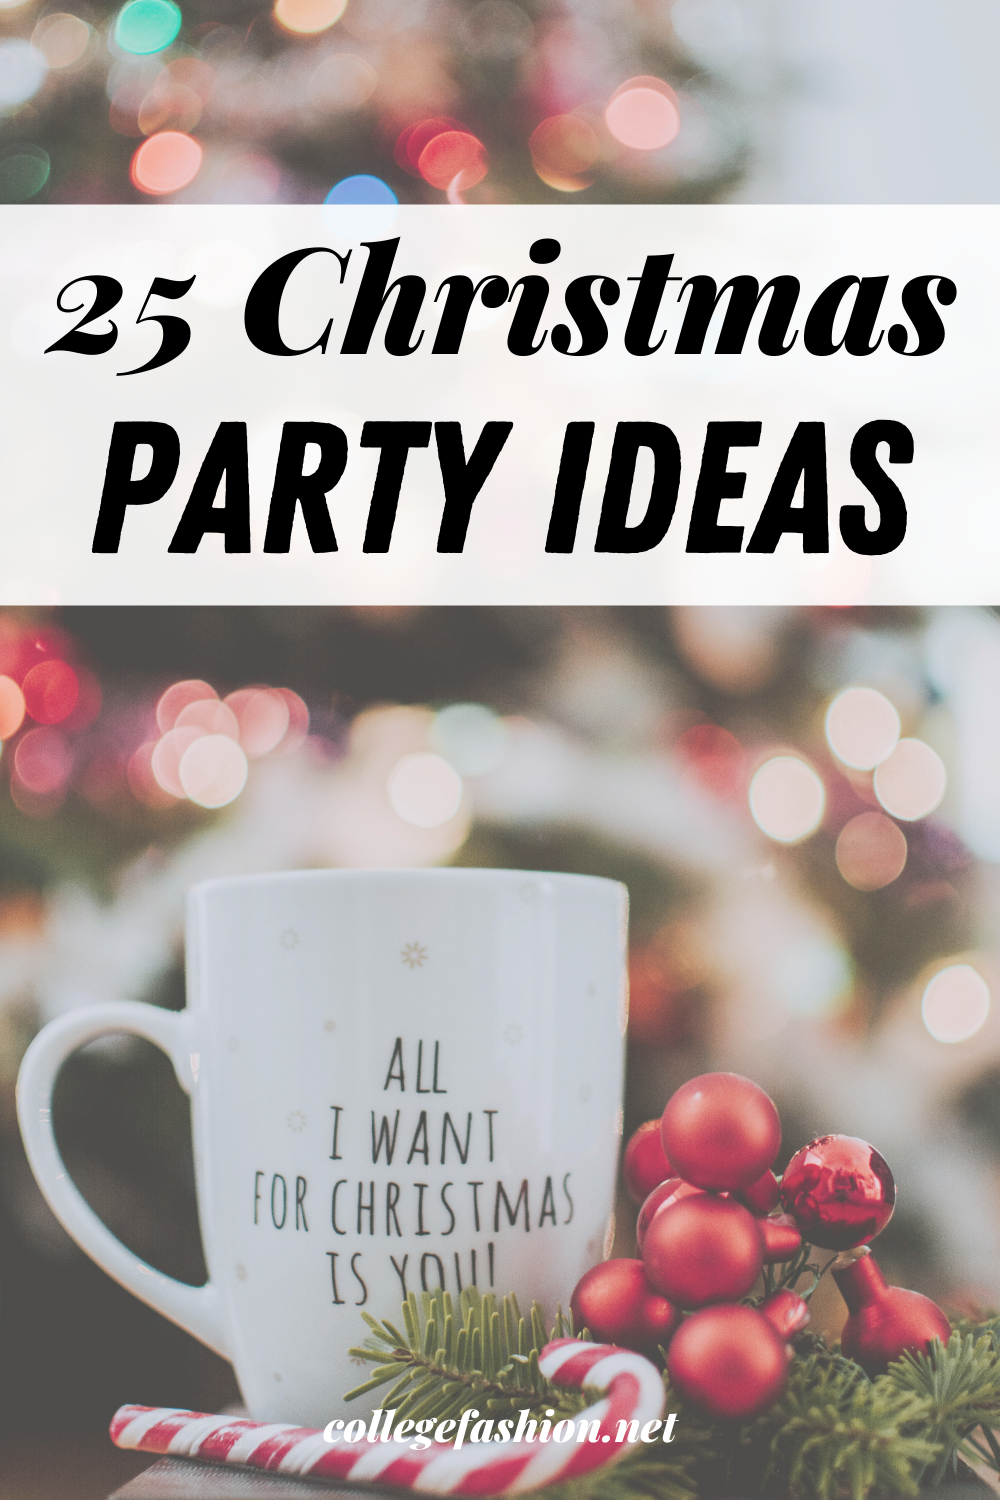 https://www.collegefashion.net/wp-content/uploads/2021/10/25-Christmas-Party-Ideas-1.png